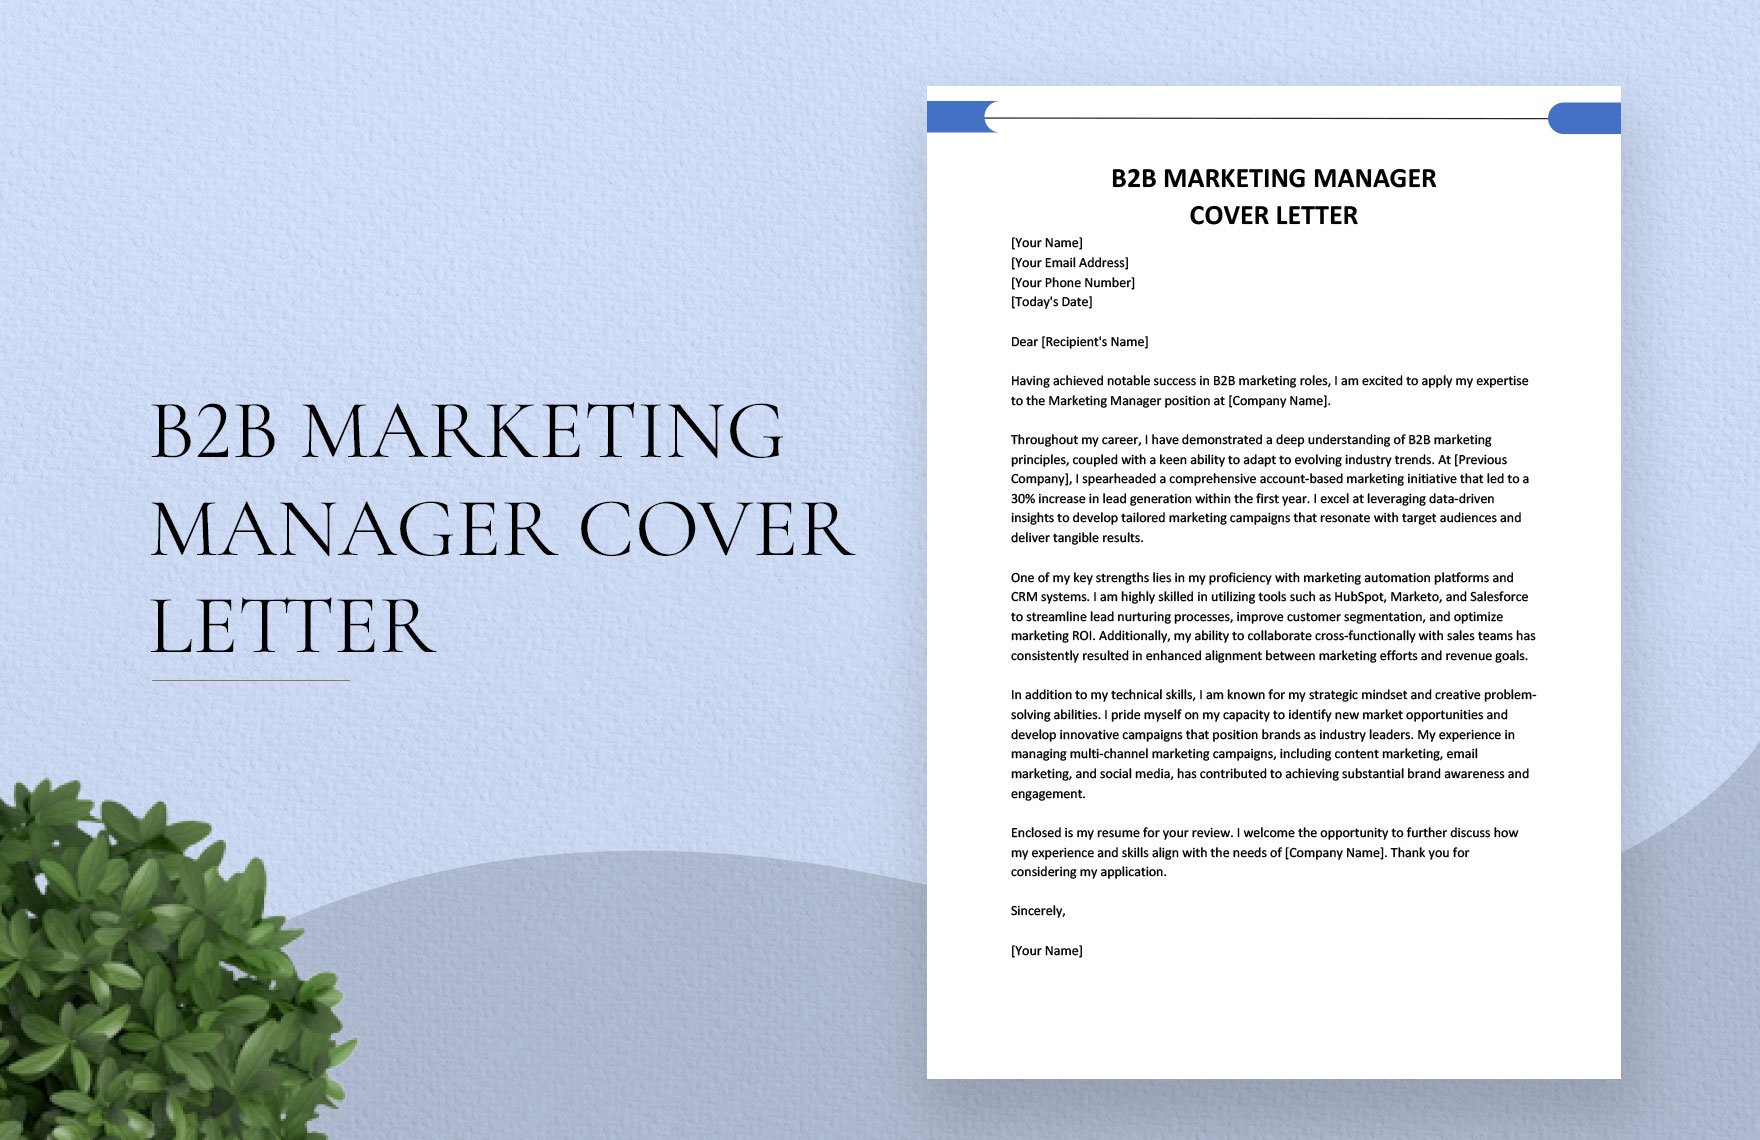 B2B Marketing Manager Cover Letter